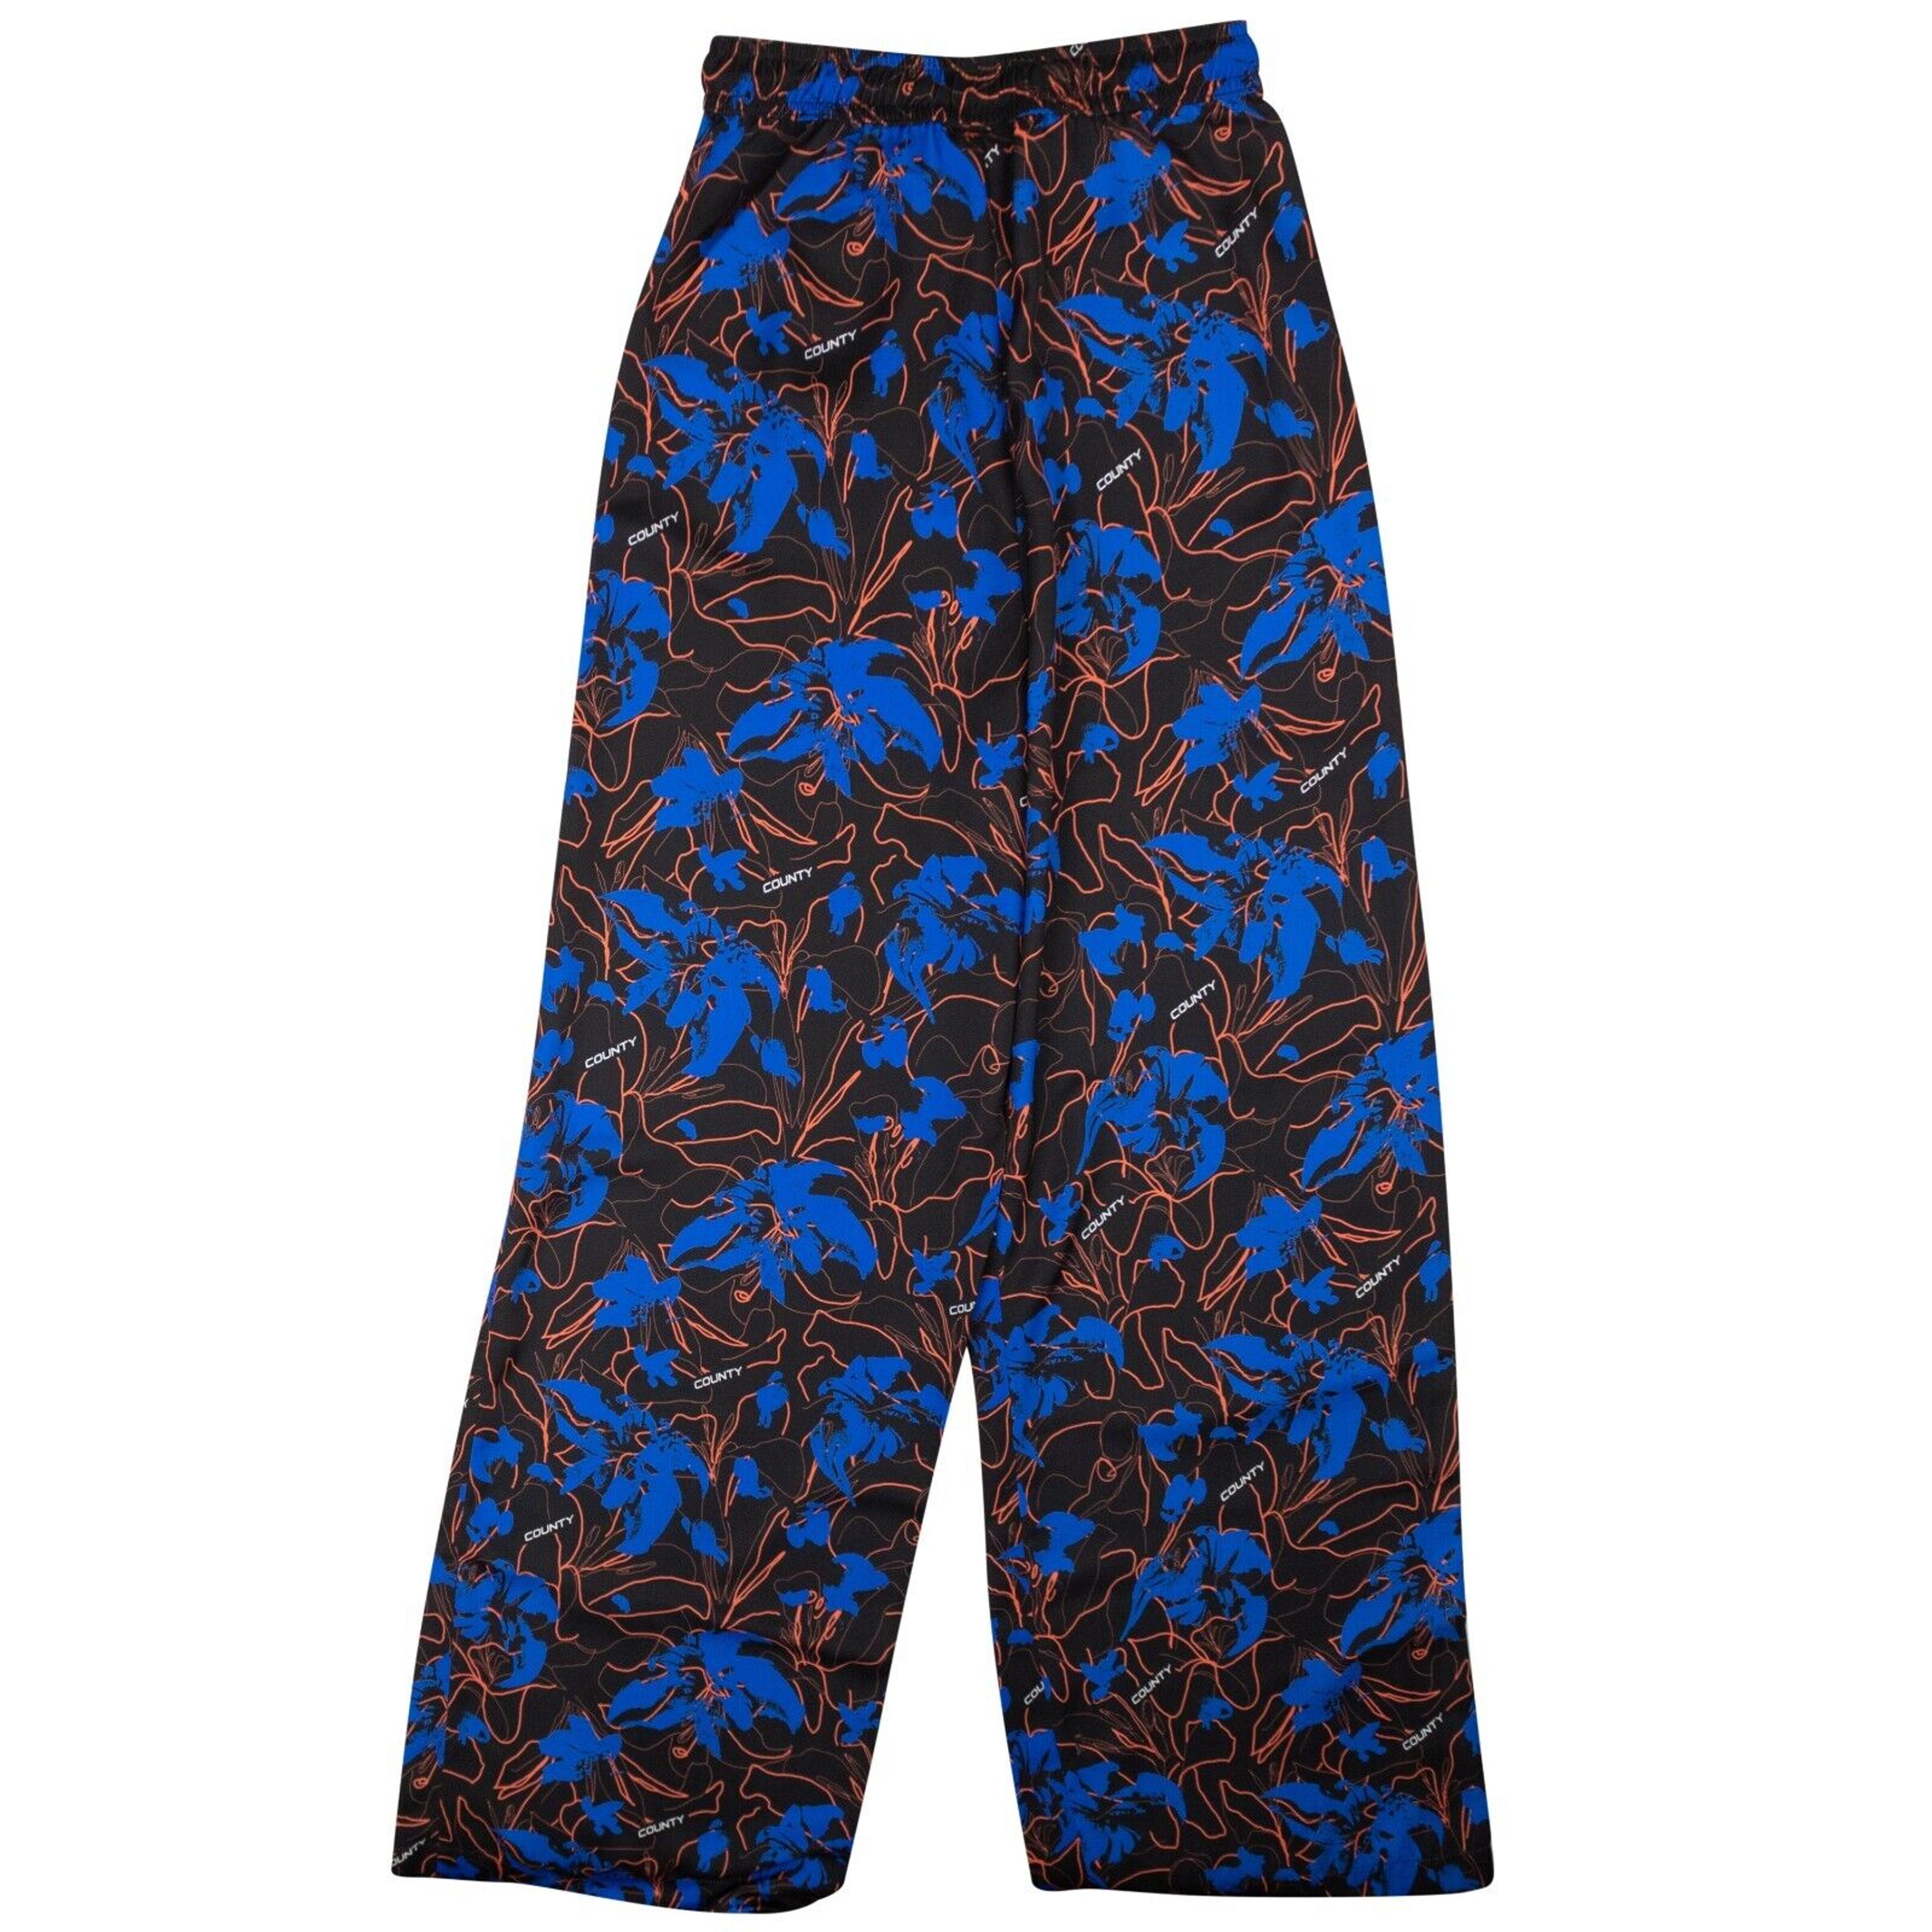 Alternate View 2 of Black And Blue Floral Wide Pants